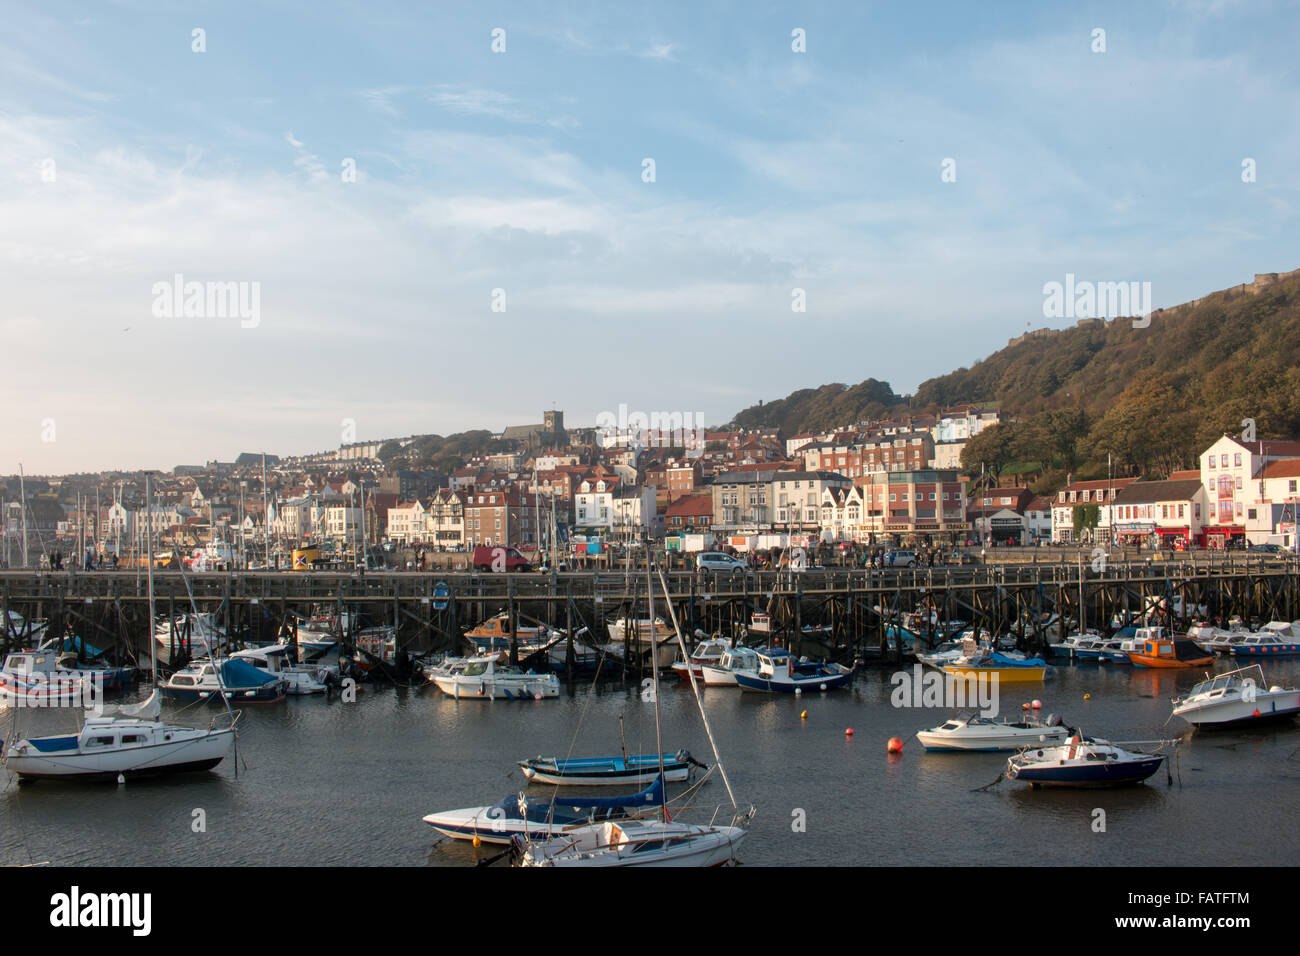 Scarborough Harbour viewed from the pier. Scarborough, North Yorkshire, United Kingdom. Stock Photo